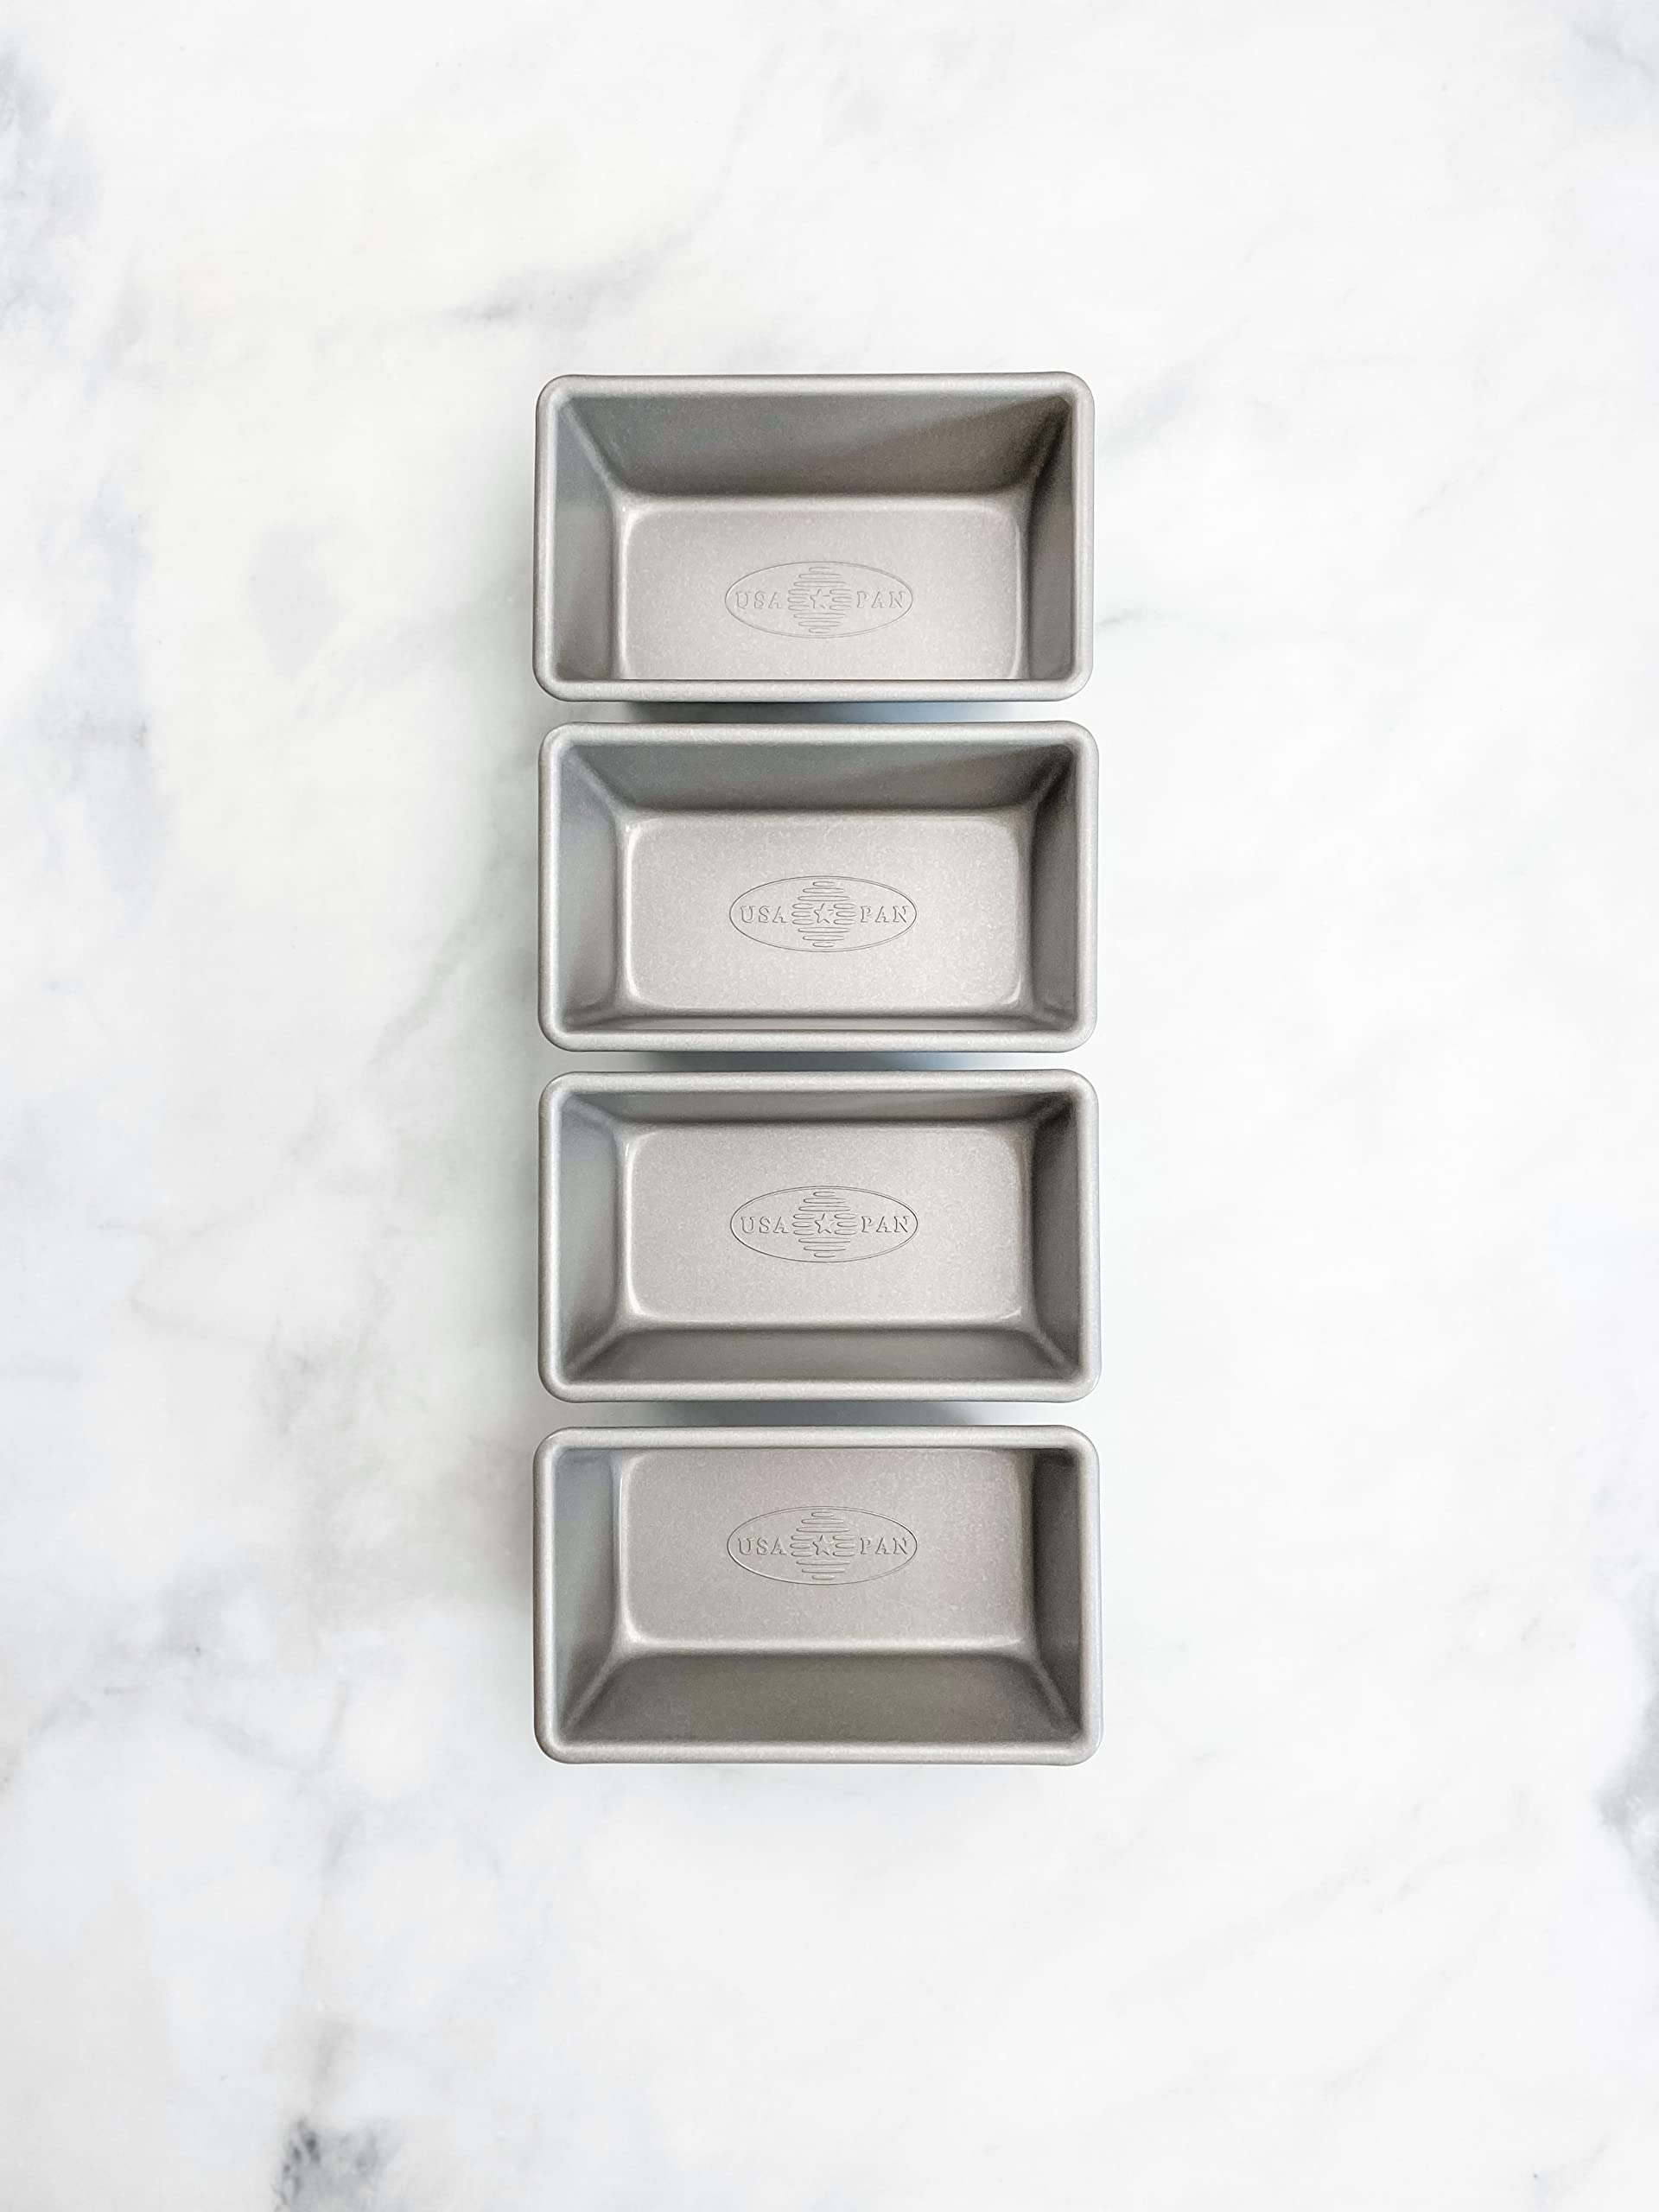 USA Pan Bakeware Mini Loaf Pan, Set of 4, Nonstick & Quick Release Coating, Made in the USA from Aluminized Steel